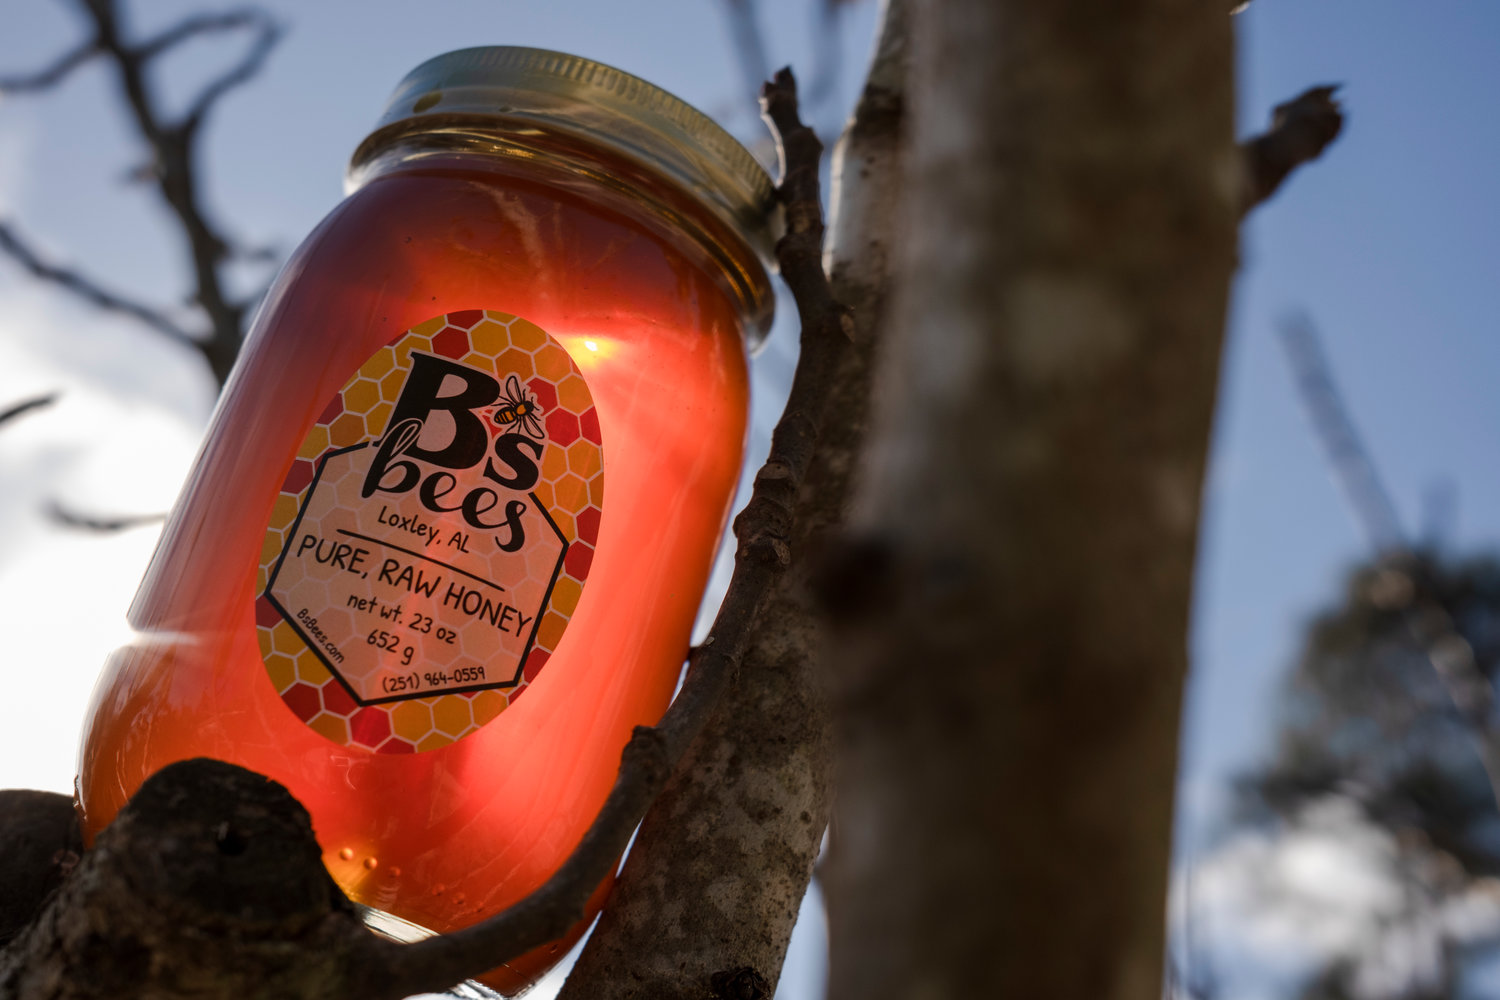 Jack Rowe, an Alabama Extension regional agent, said one of the best ways to support communities and local people is by purchasing locally grown and produced products. Local honey is available at most farm stands or farmers markets.